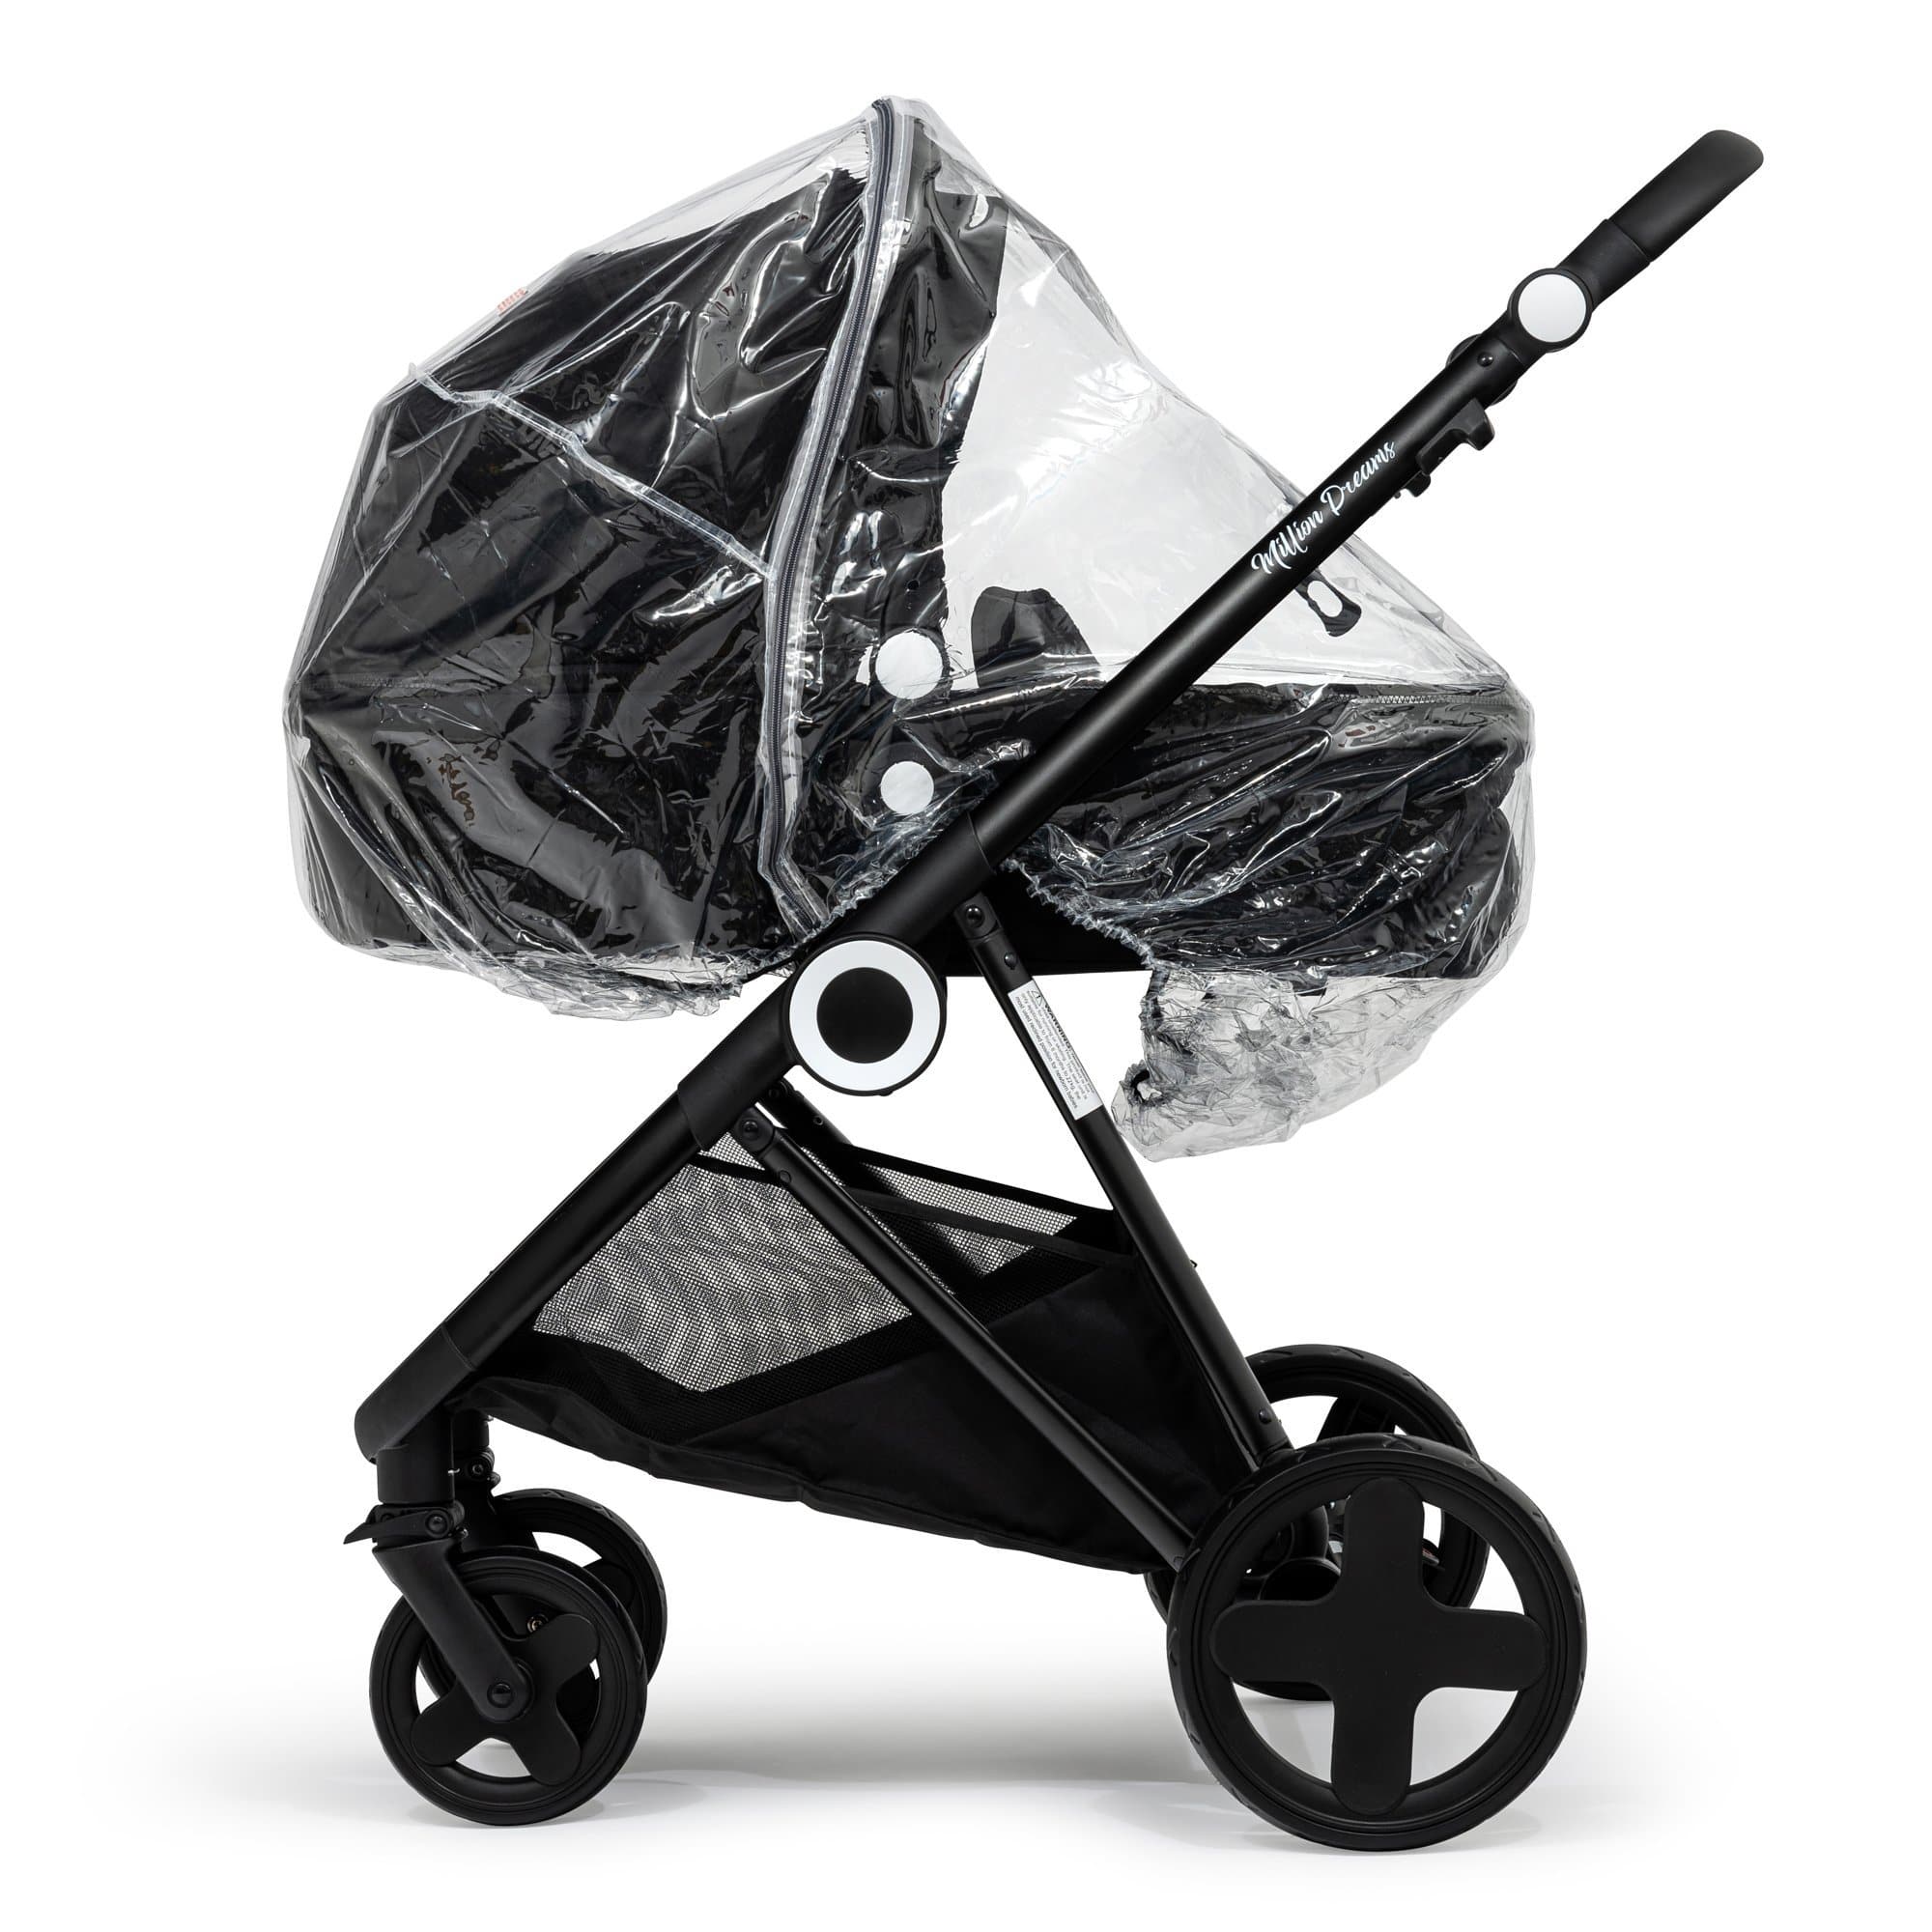 2 in 1 Rain Cover Compatible with My Babiie - Fits All Models - For Your Little One